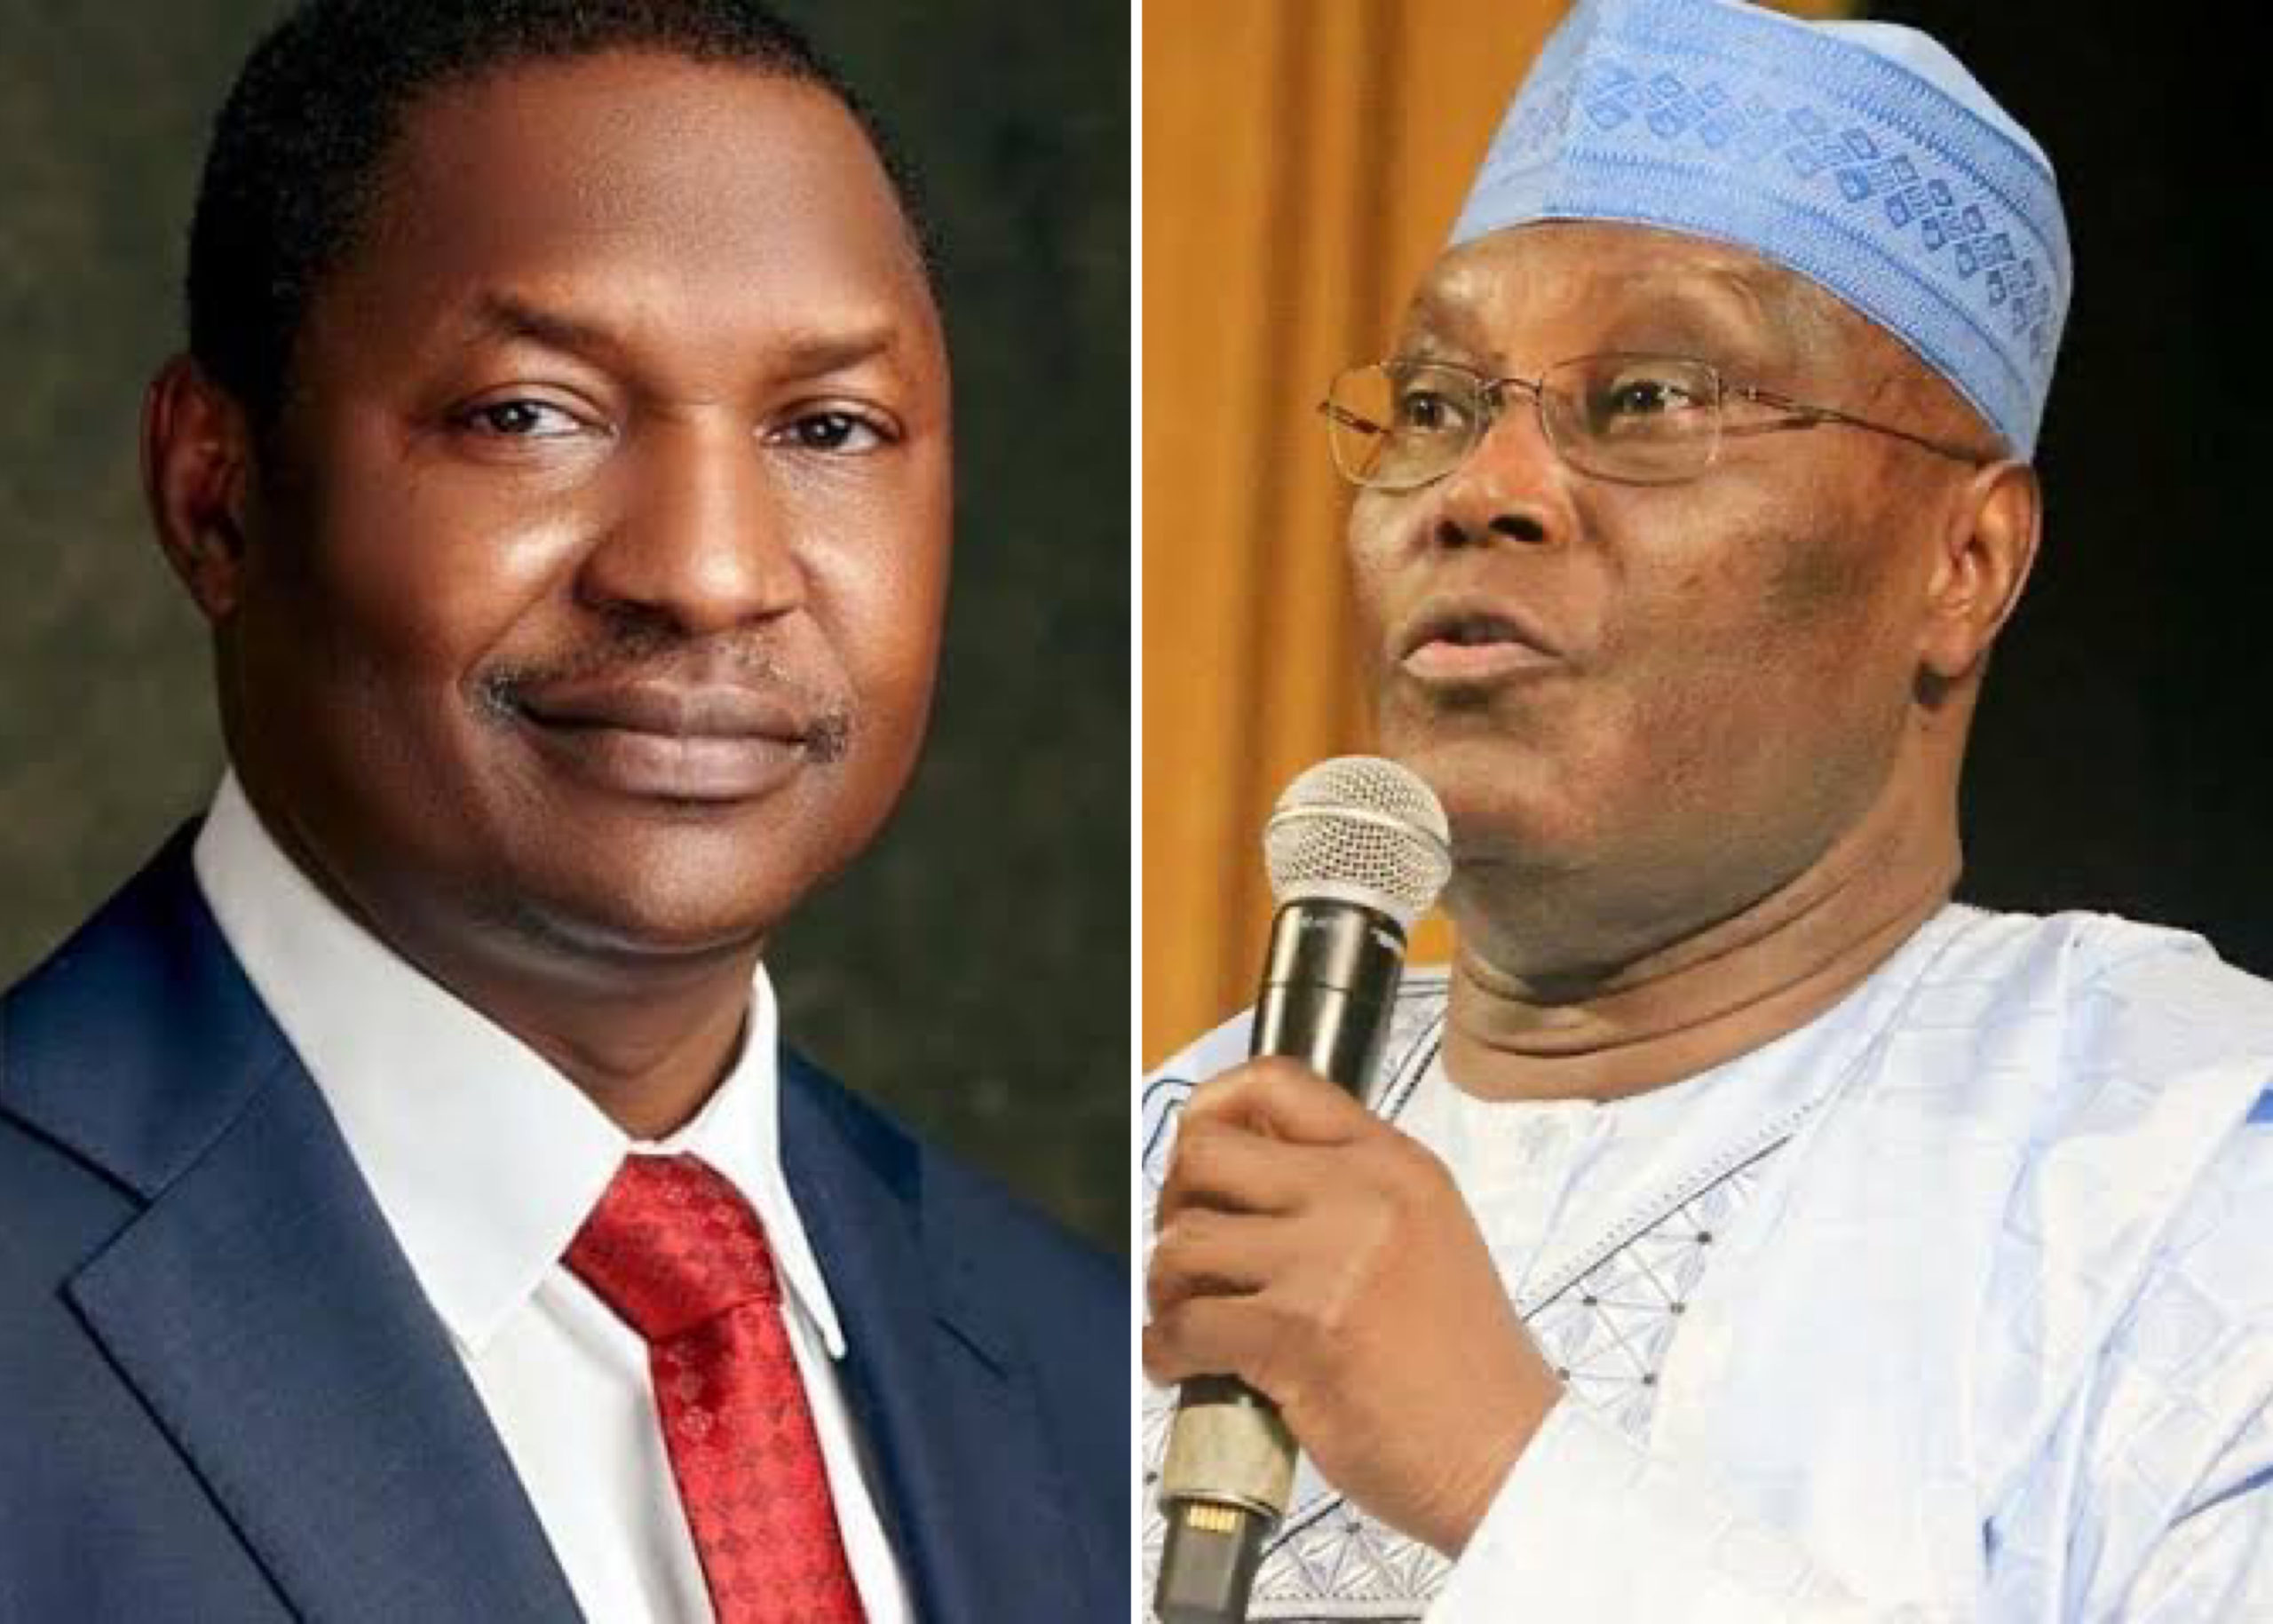 Atiku Not Fit To Contest For President, Not Nigerian By Birth - AGF Malami Tells Court